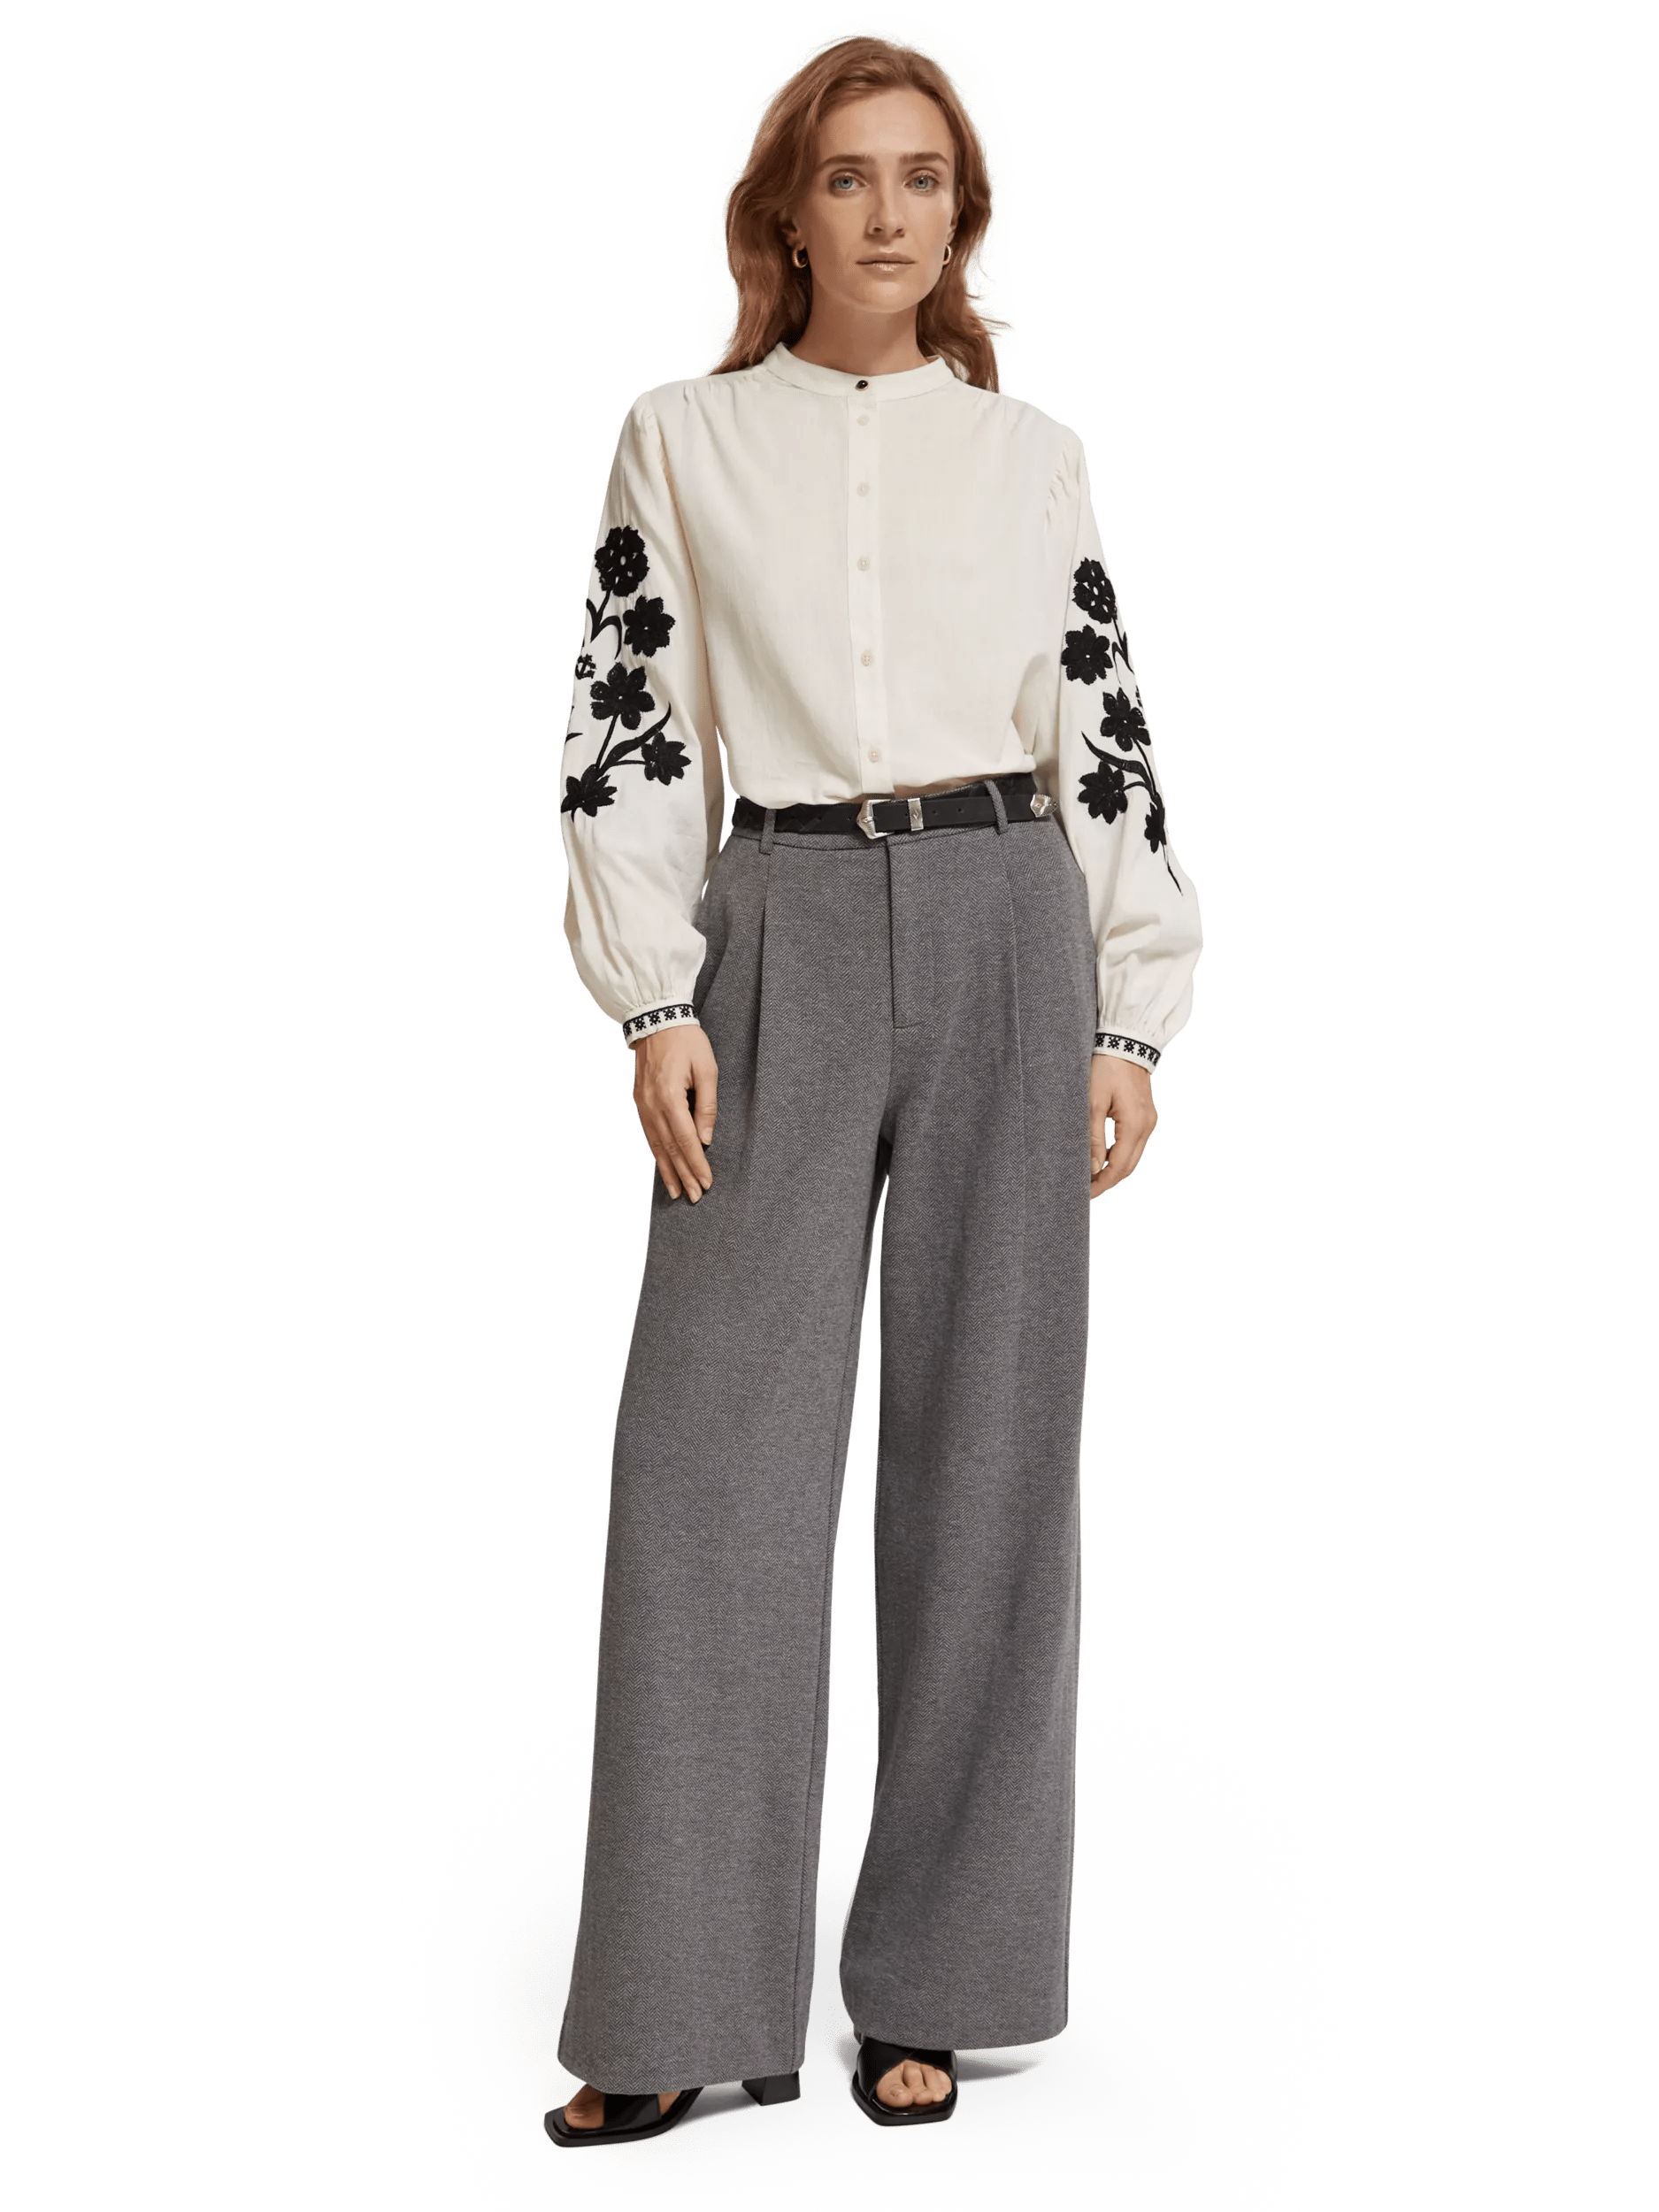 How to wear oversized clothing - Kate Waterhouse